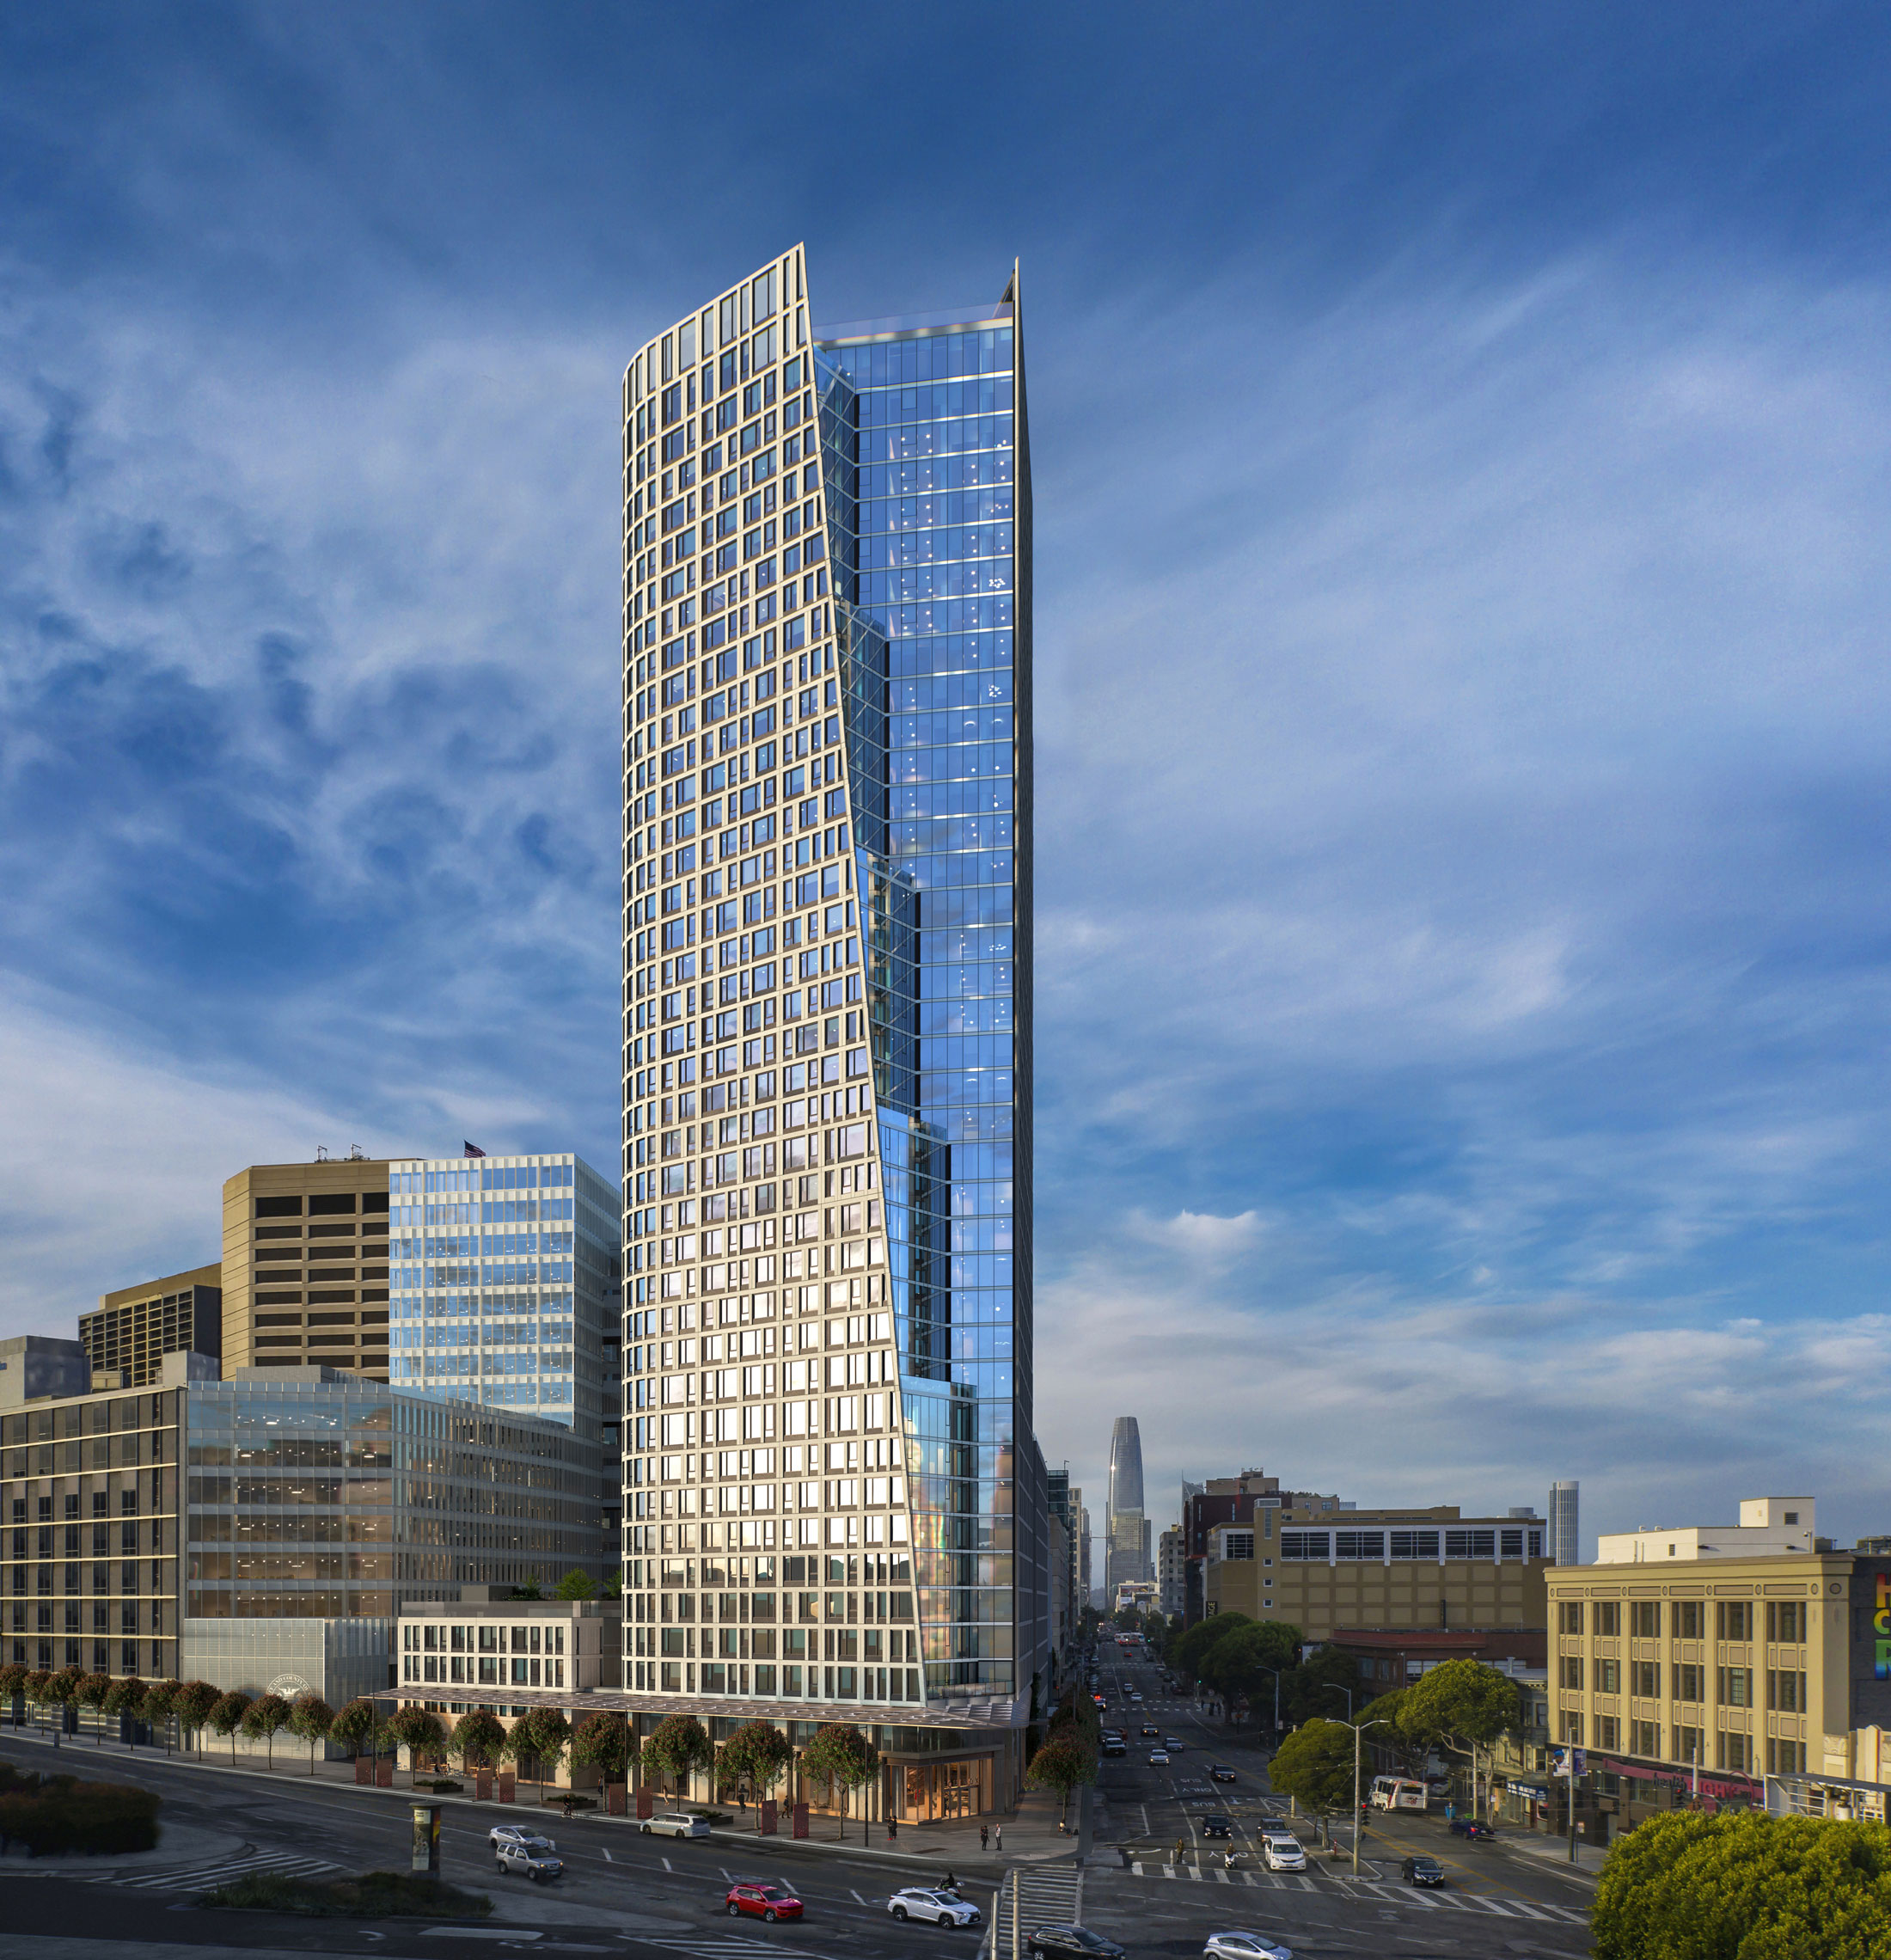 Architectural Rendering of the tower of the Fifteen Fifty project located in San Francisco, California